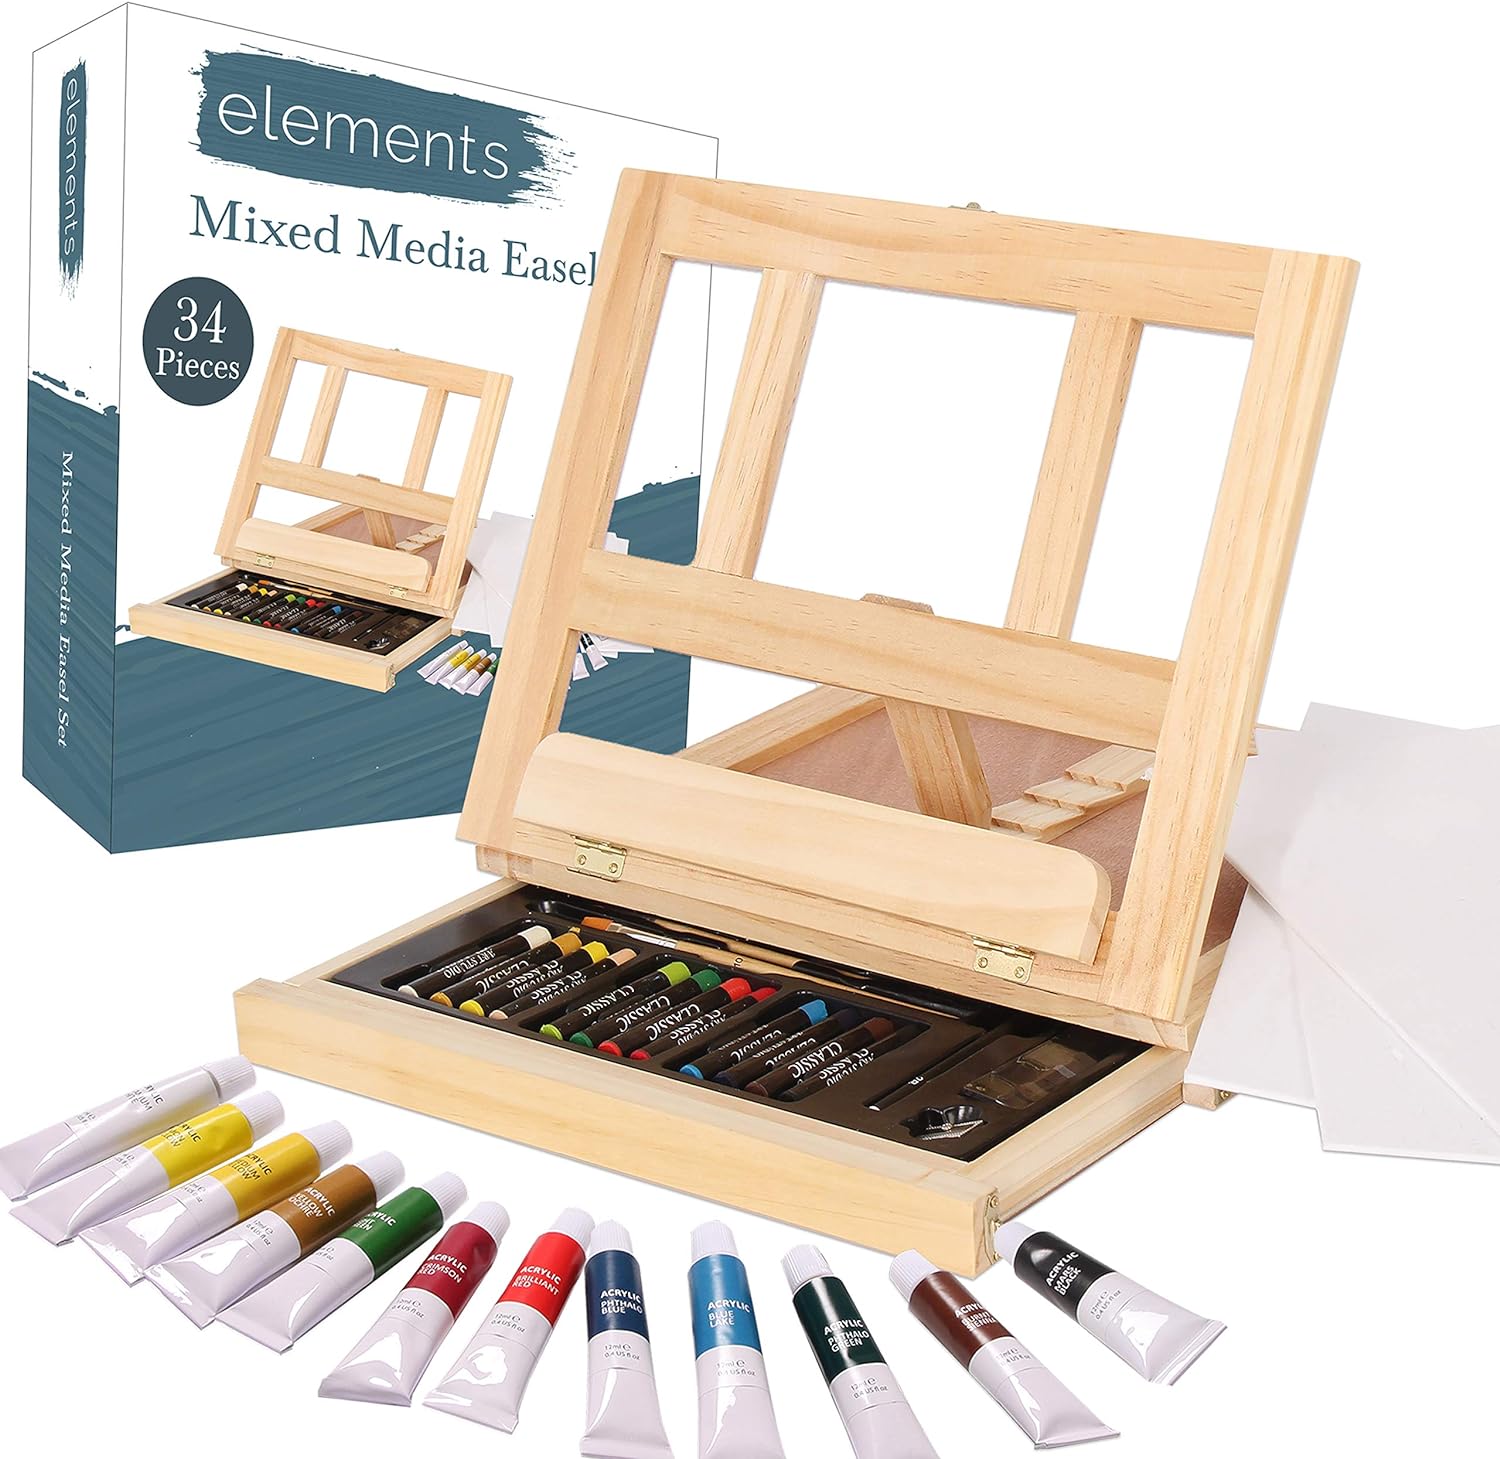 Mixed Media Art Set - 34 Piece, Easel Painting Kit with Wood Table Desk Top  Easel Box Includes Acrylic Paints, 3 Canvas Boards, Pastels, Desktop Art